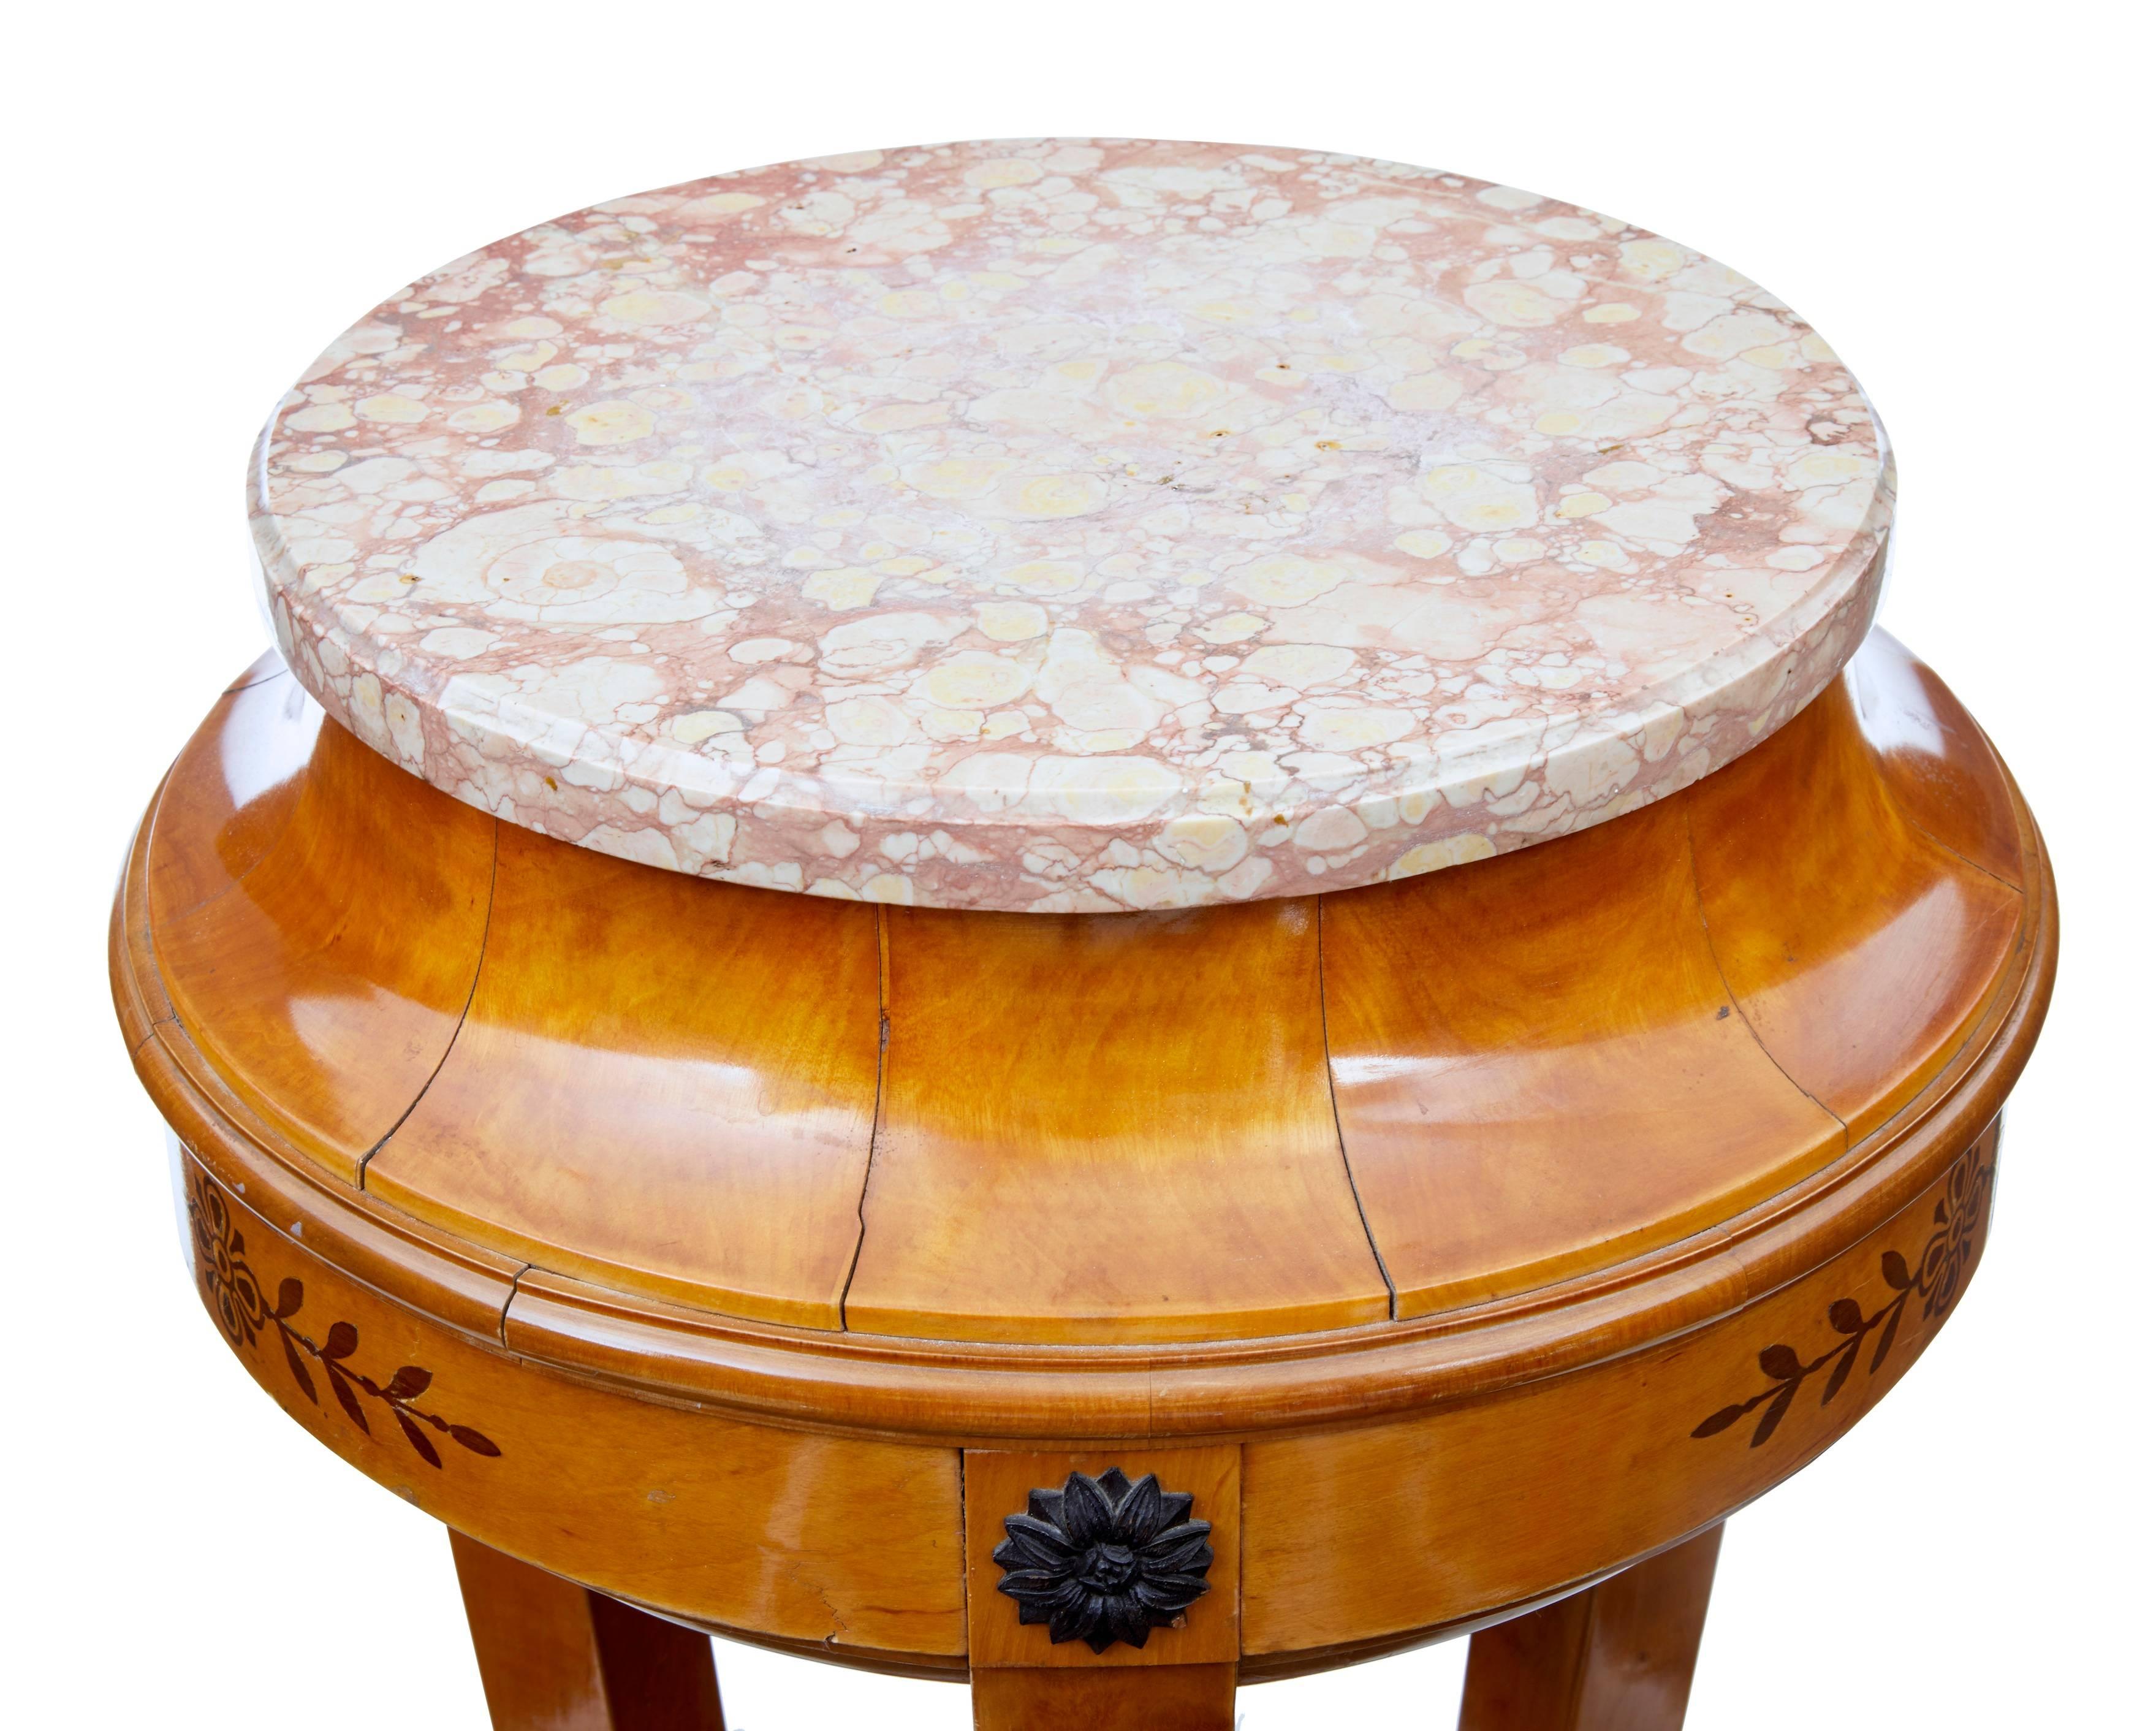 Top quality birch jardinere stand, circa 1890.
Circular marble top which is removable. (Please advise if you want this fixed permanently)
Inlaid with mahogany. Standing on three swooping legs which terminate into a tripod base.
Some movement to